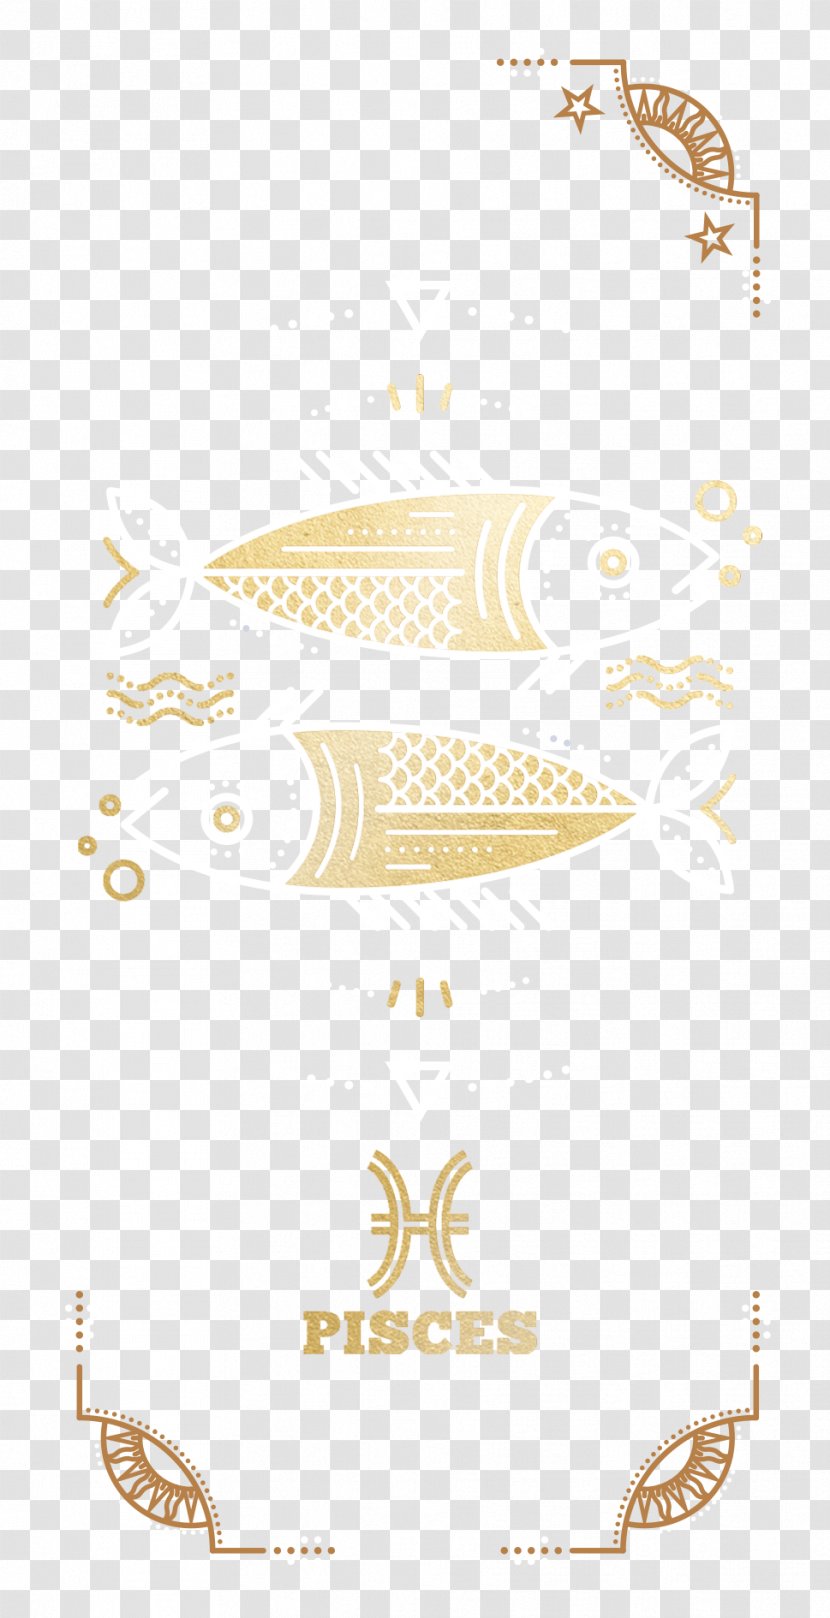 Calligraphy - Pisces Transparent PNG